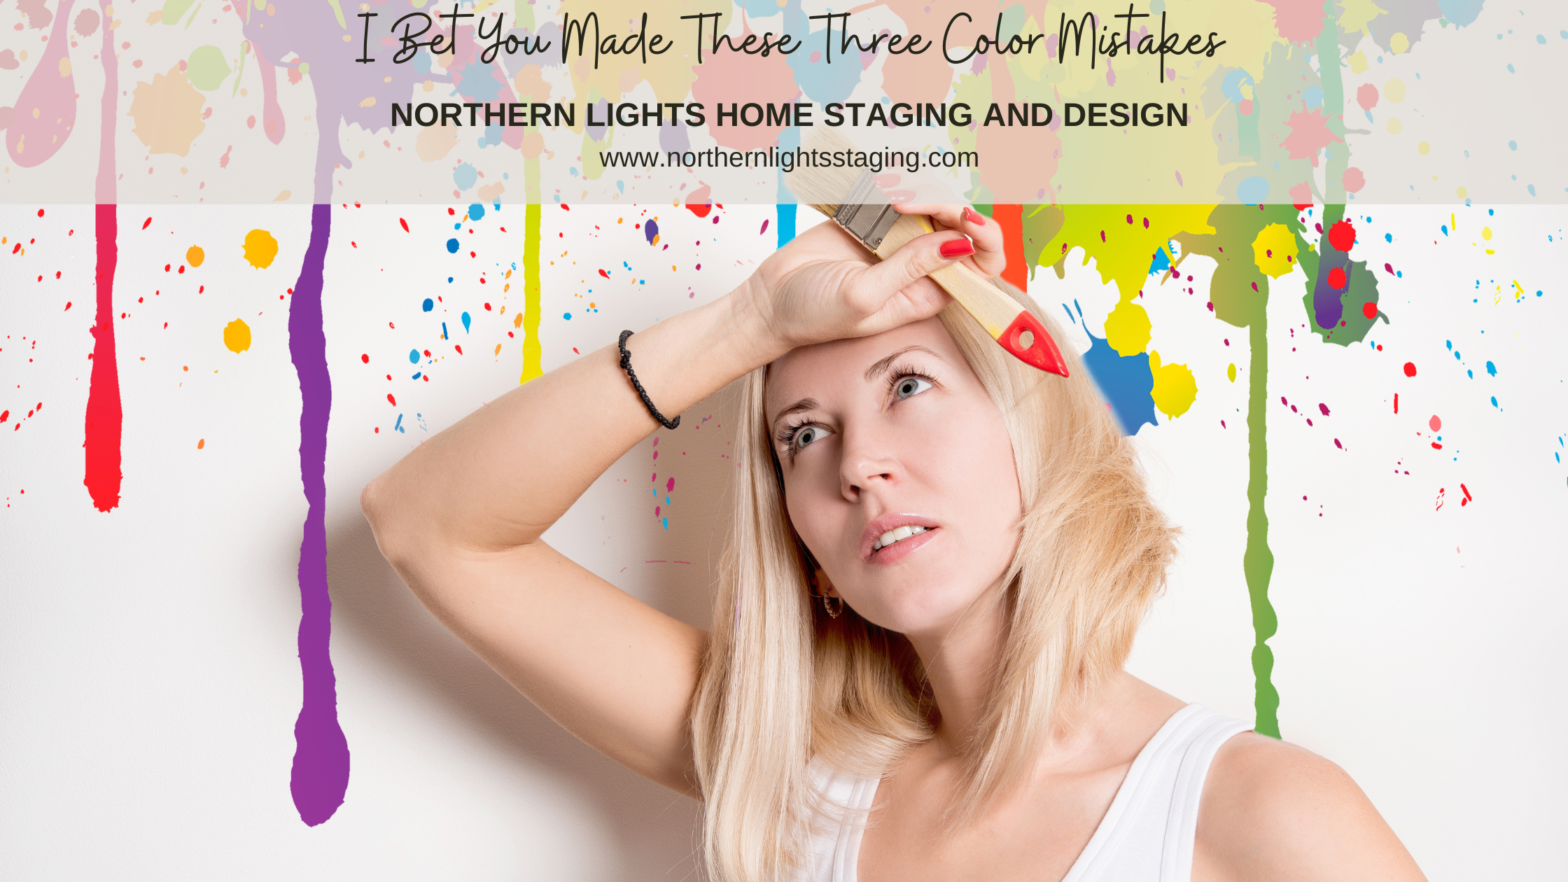 I Bet You Made these Three Color Mistakes. Get your colors right the first time with the help of a certified color strategist. Northern Lights Home Staging and Design.